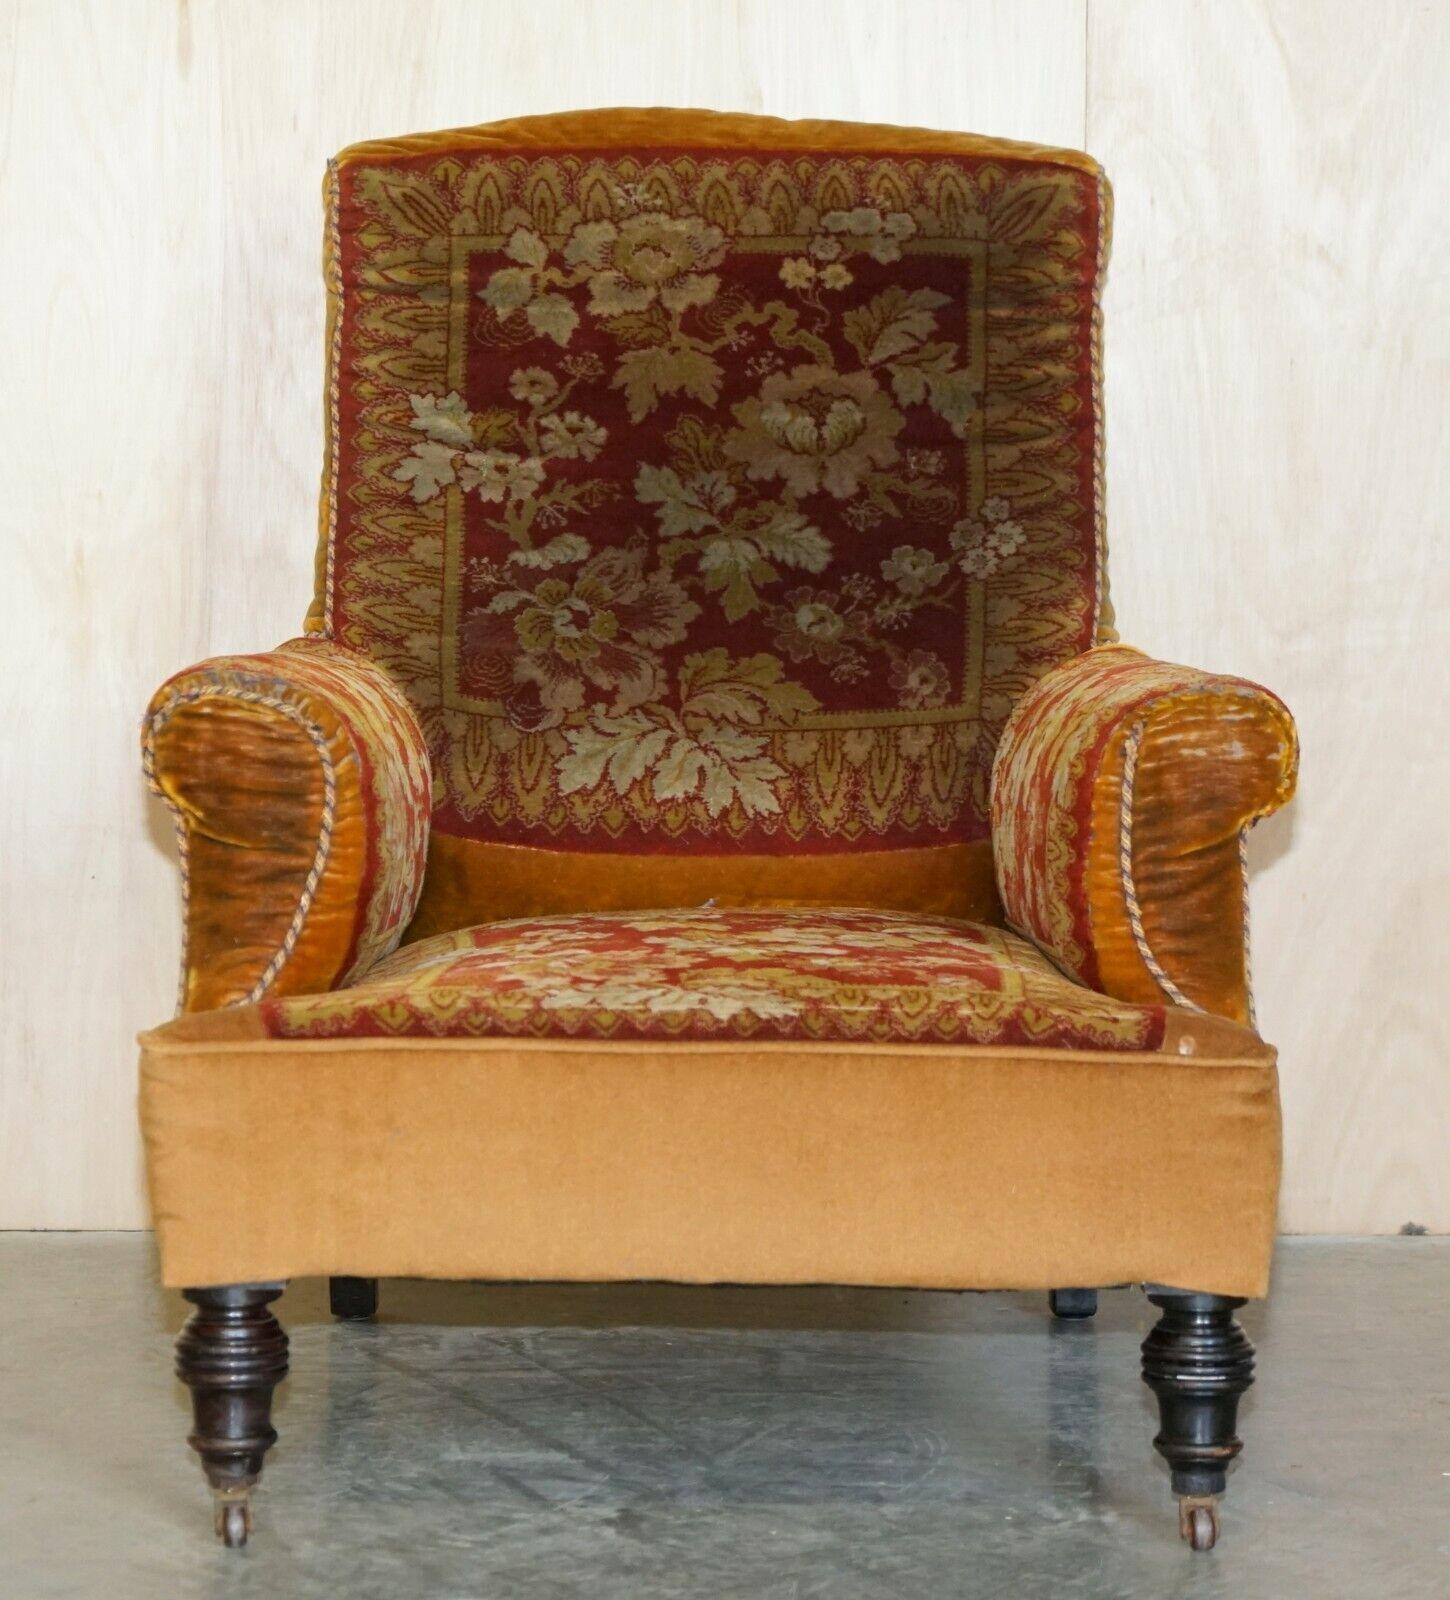 Royal House Antiques

Royal House Antiques is delighted to offer for sale this very rare and highly collectable original Victorian mahogany framed country house club armchair with bordered Turkey Kilim Rug upholstery and porcelain castors in the